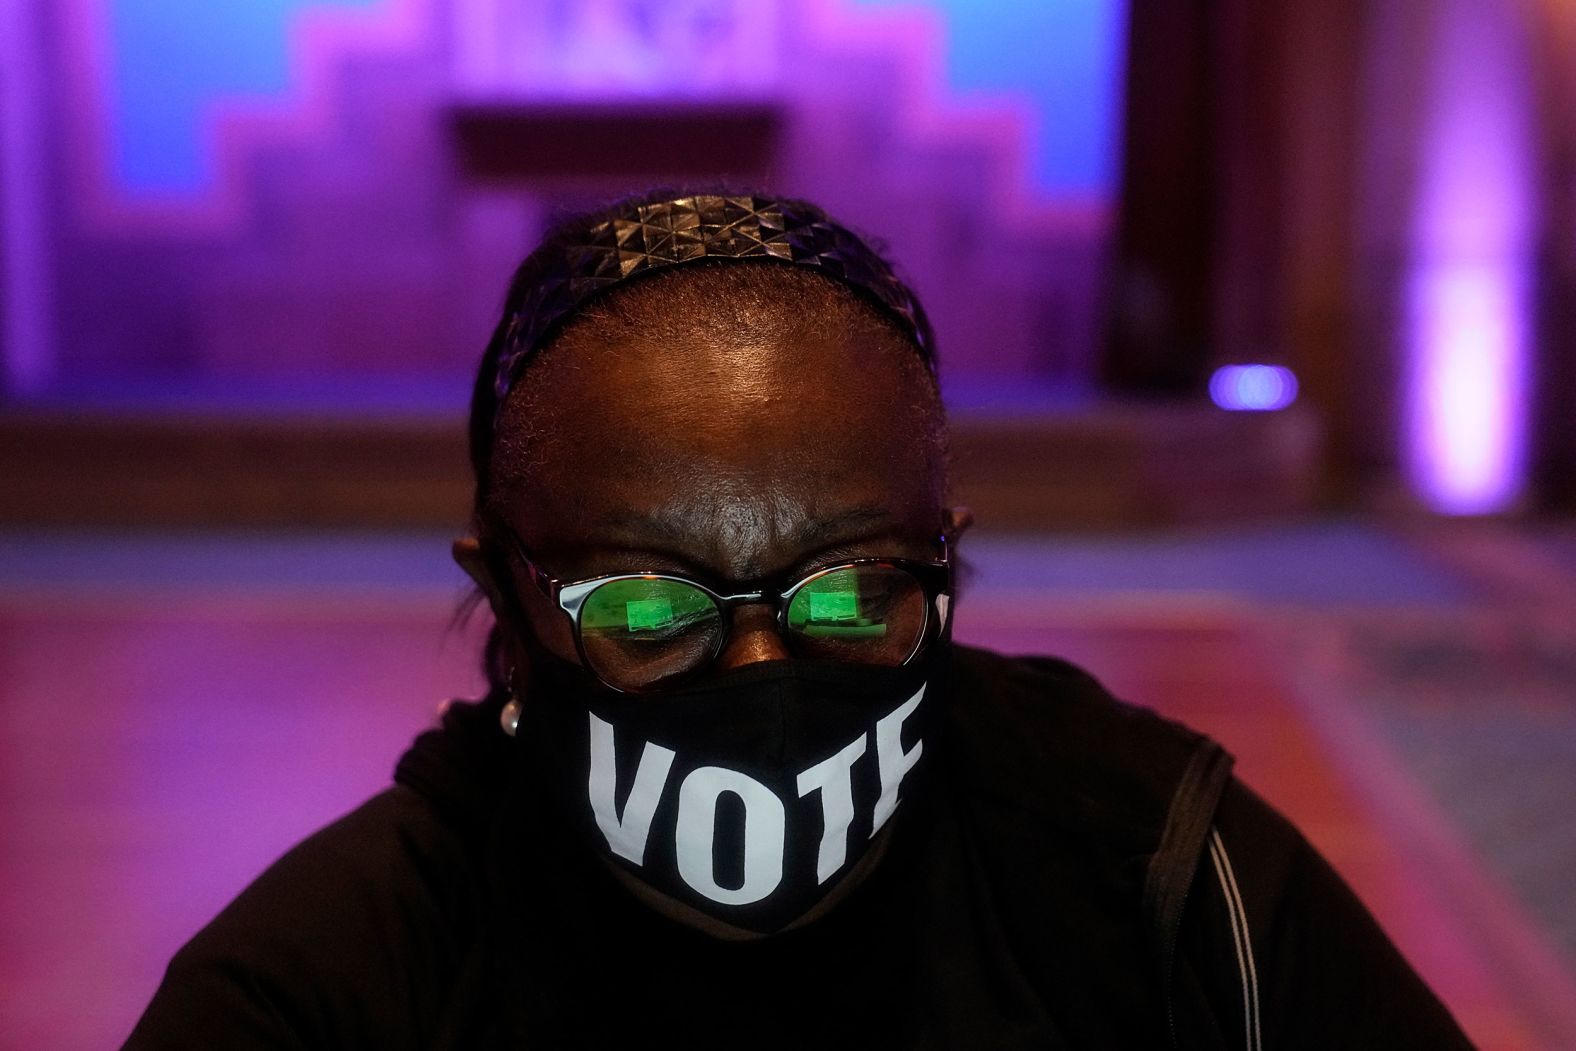 A poll worker in Atlanta wears a "vote" mask while checking in voters on Election Day.